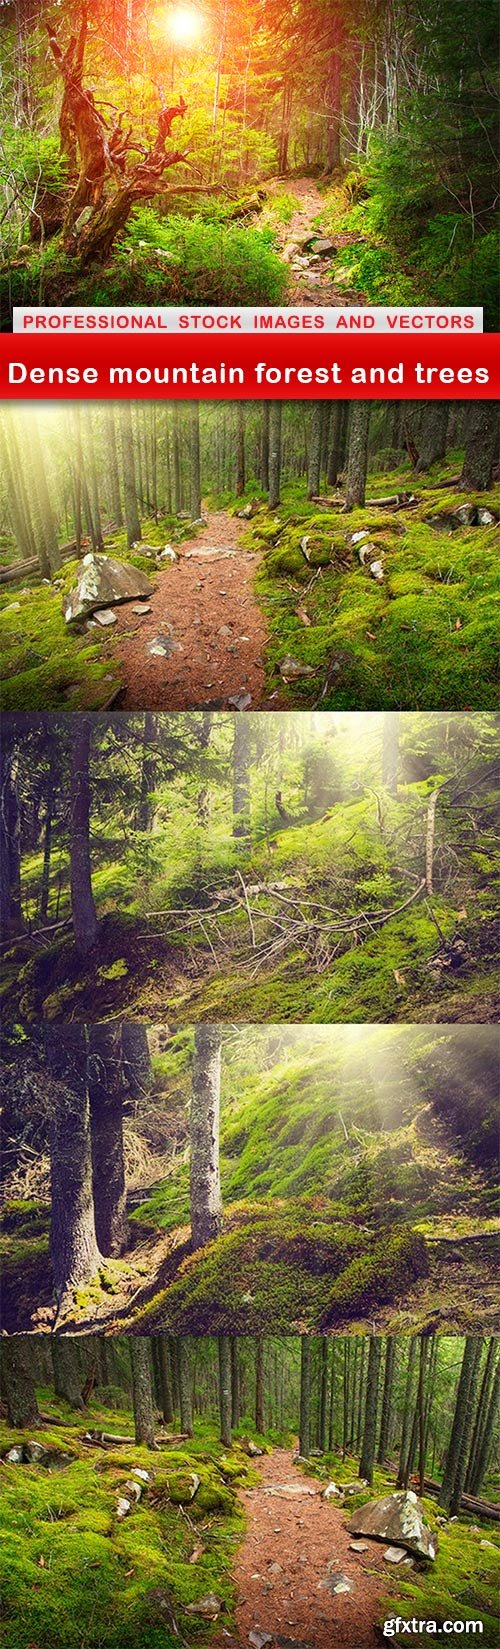 Dense mountain forest and trees - 5 UHQ JPEG